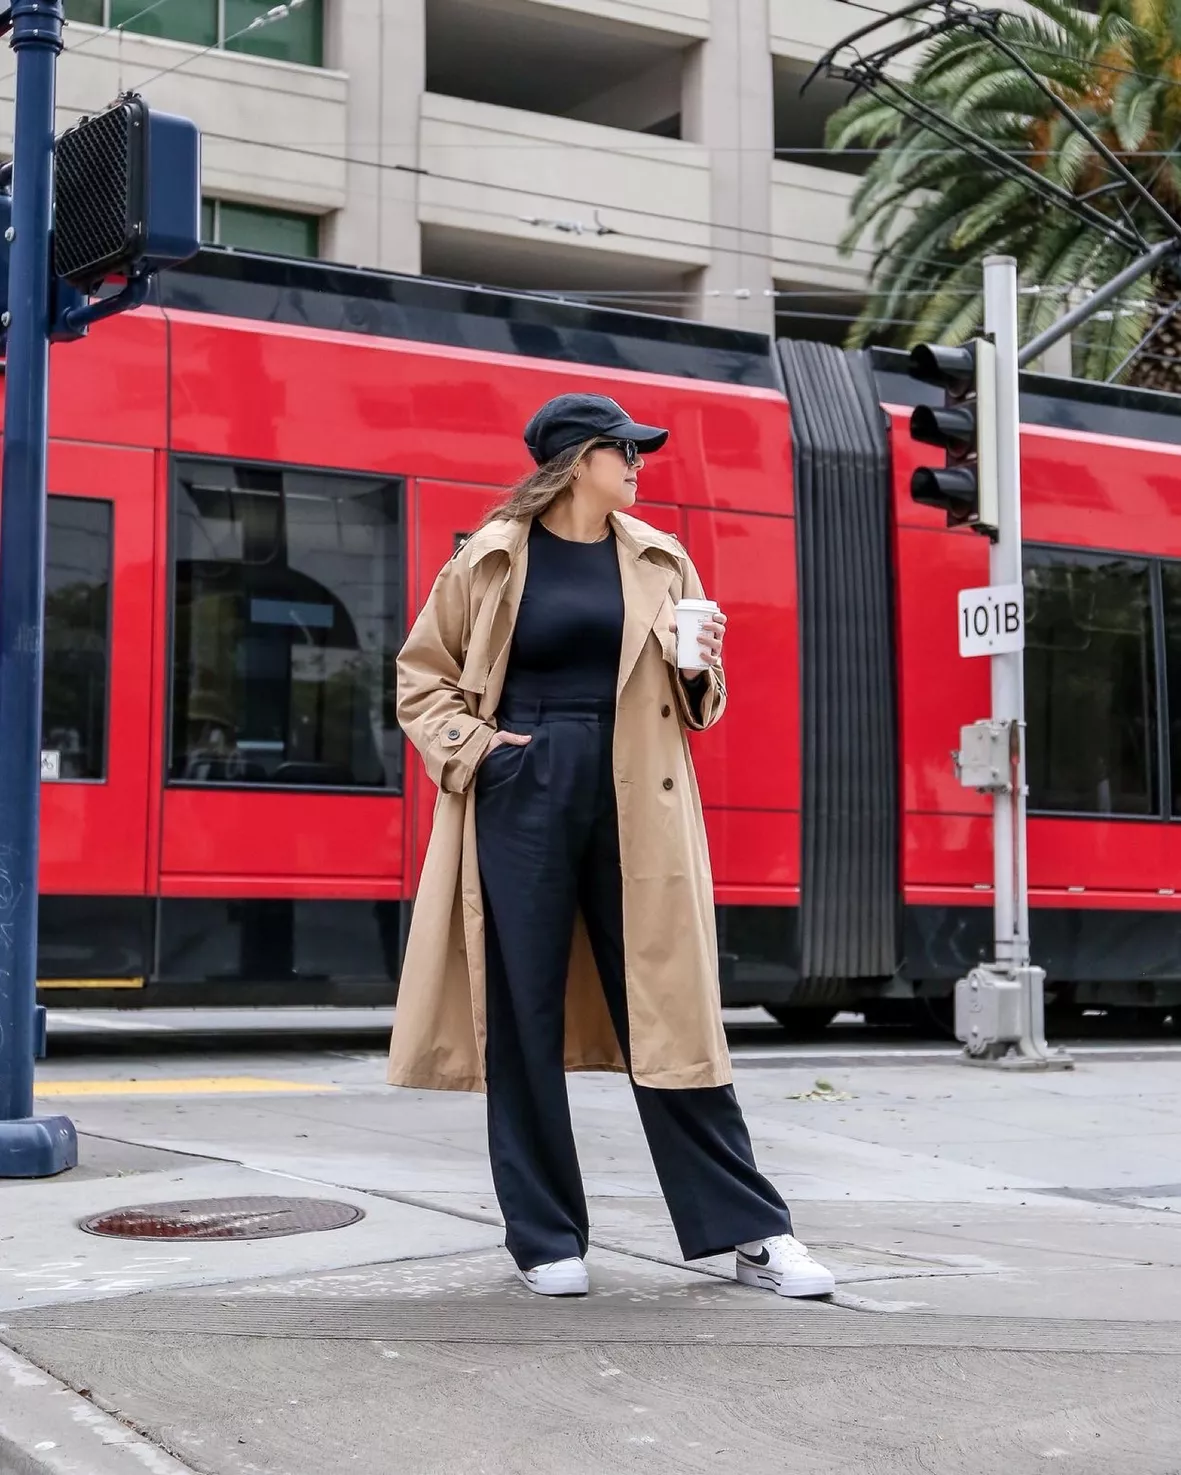 Classic Fall Outfit! 🤎 Trench coat, black wide leg pants, and sneakers for  comfort! ✨ Comment LINK to get outfit links + sizing in